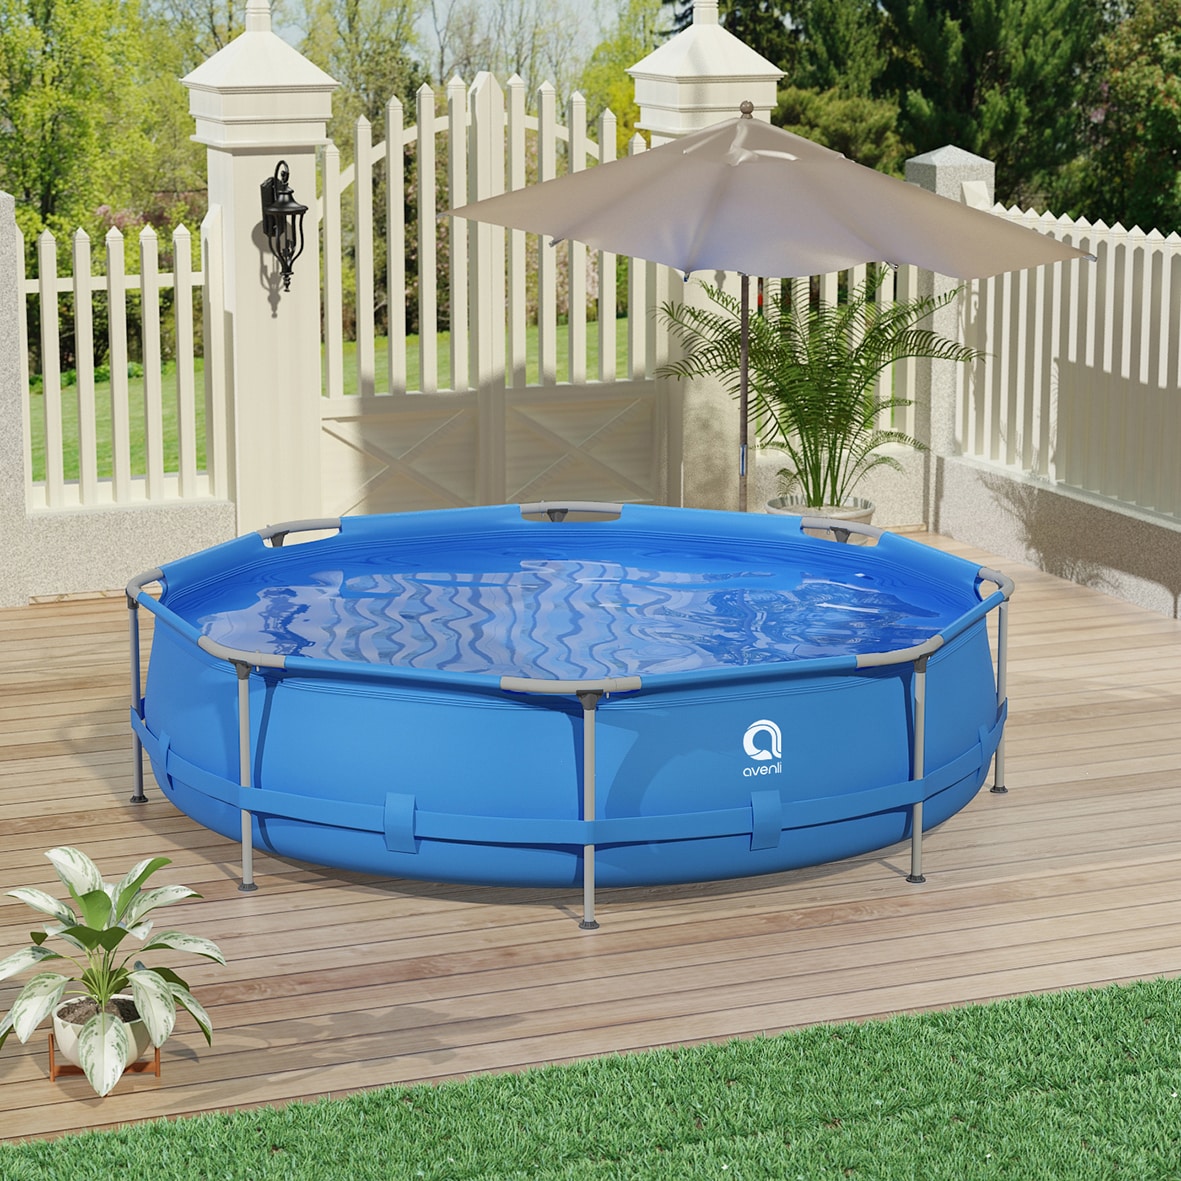 10FT ROUND FAMILY SWIMMING POOL NEW PADDLING OUTDOOR FUN BLUE GARDEN 